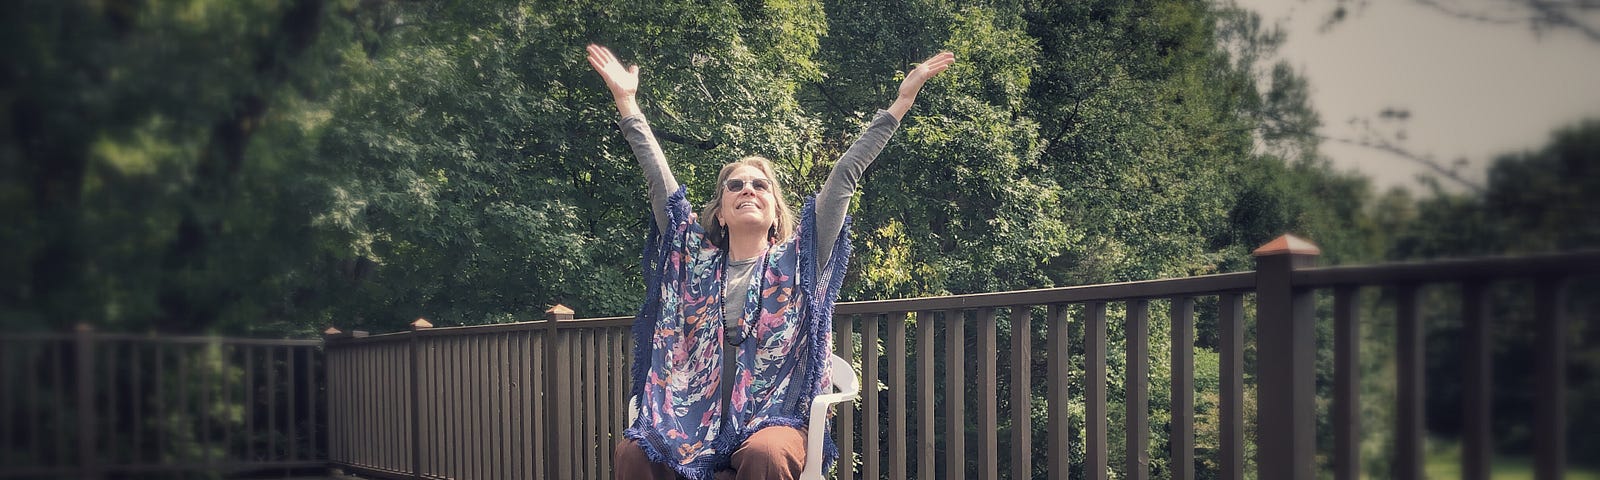 woman sitting on deck raising her hands to the sky in a gesture of happiness